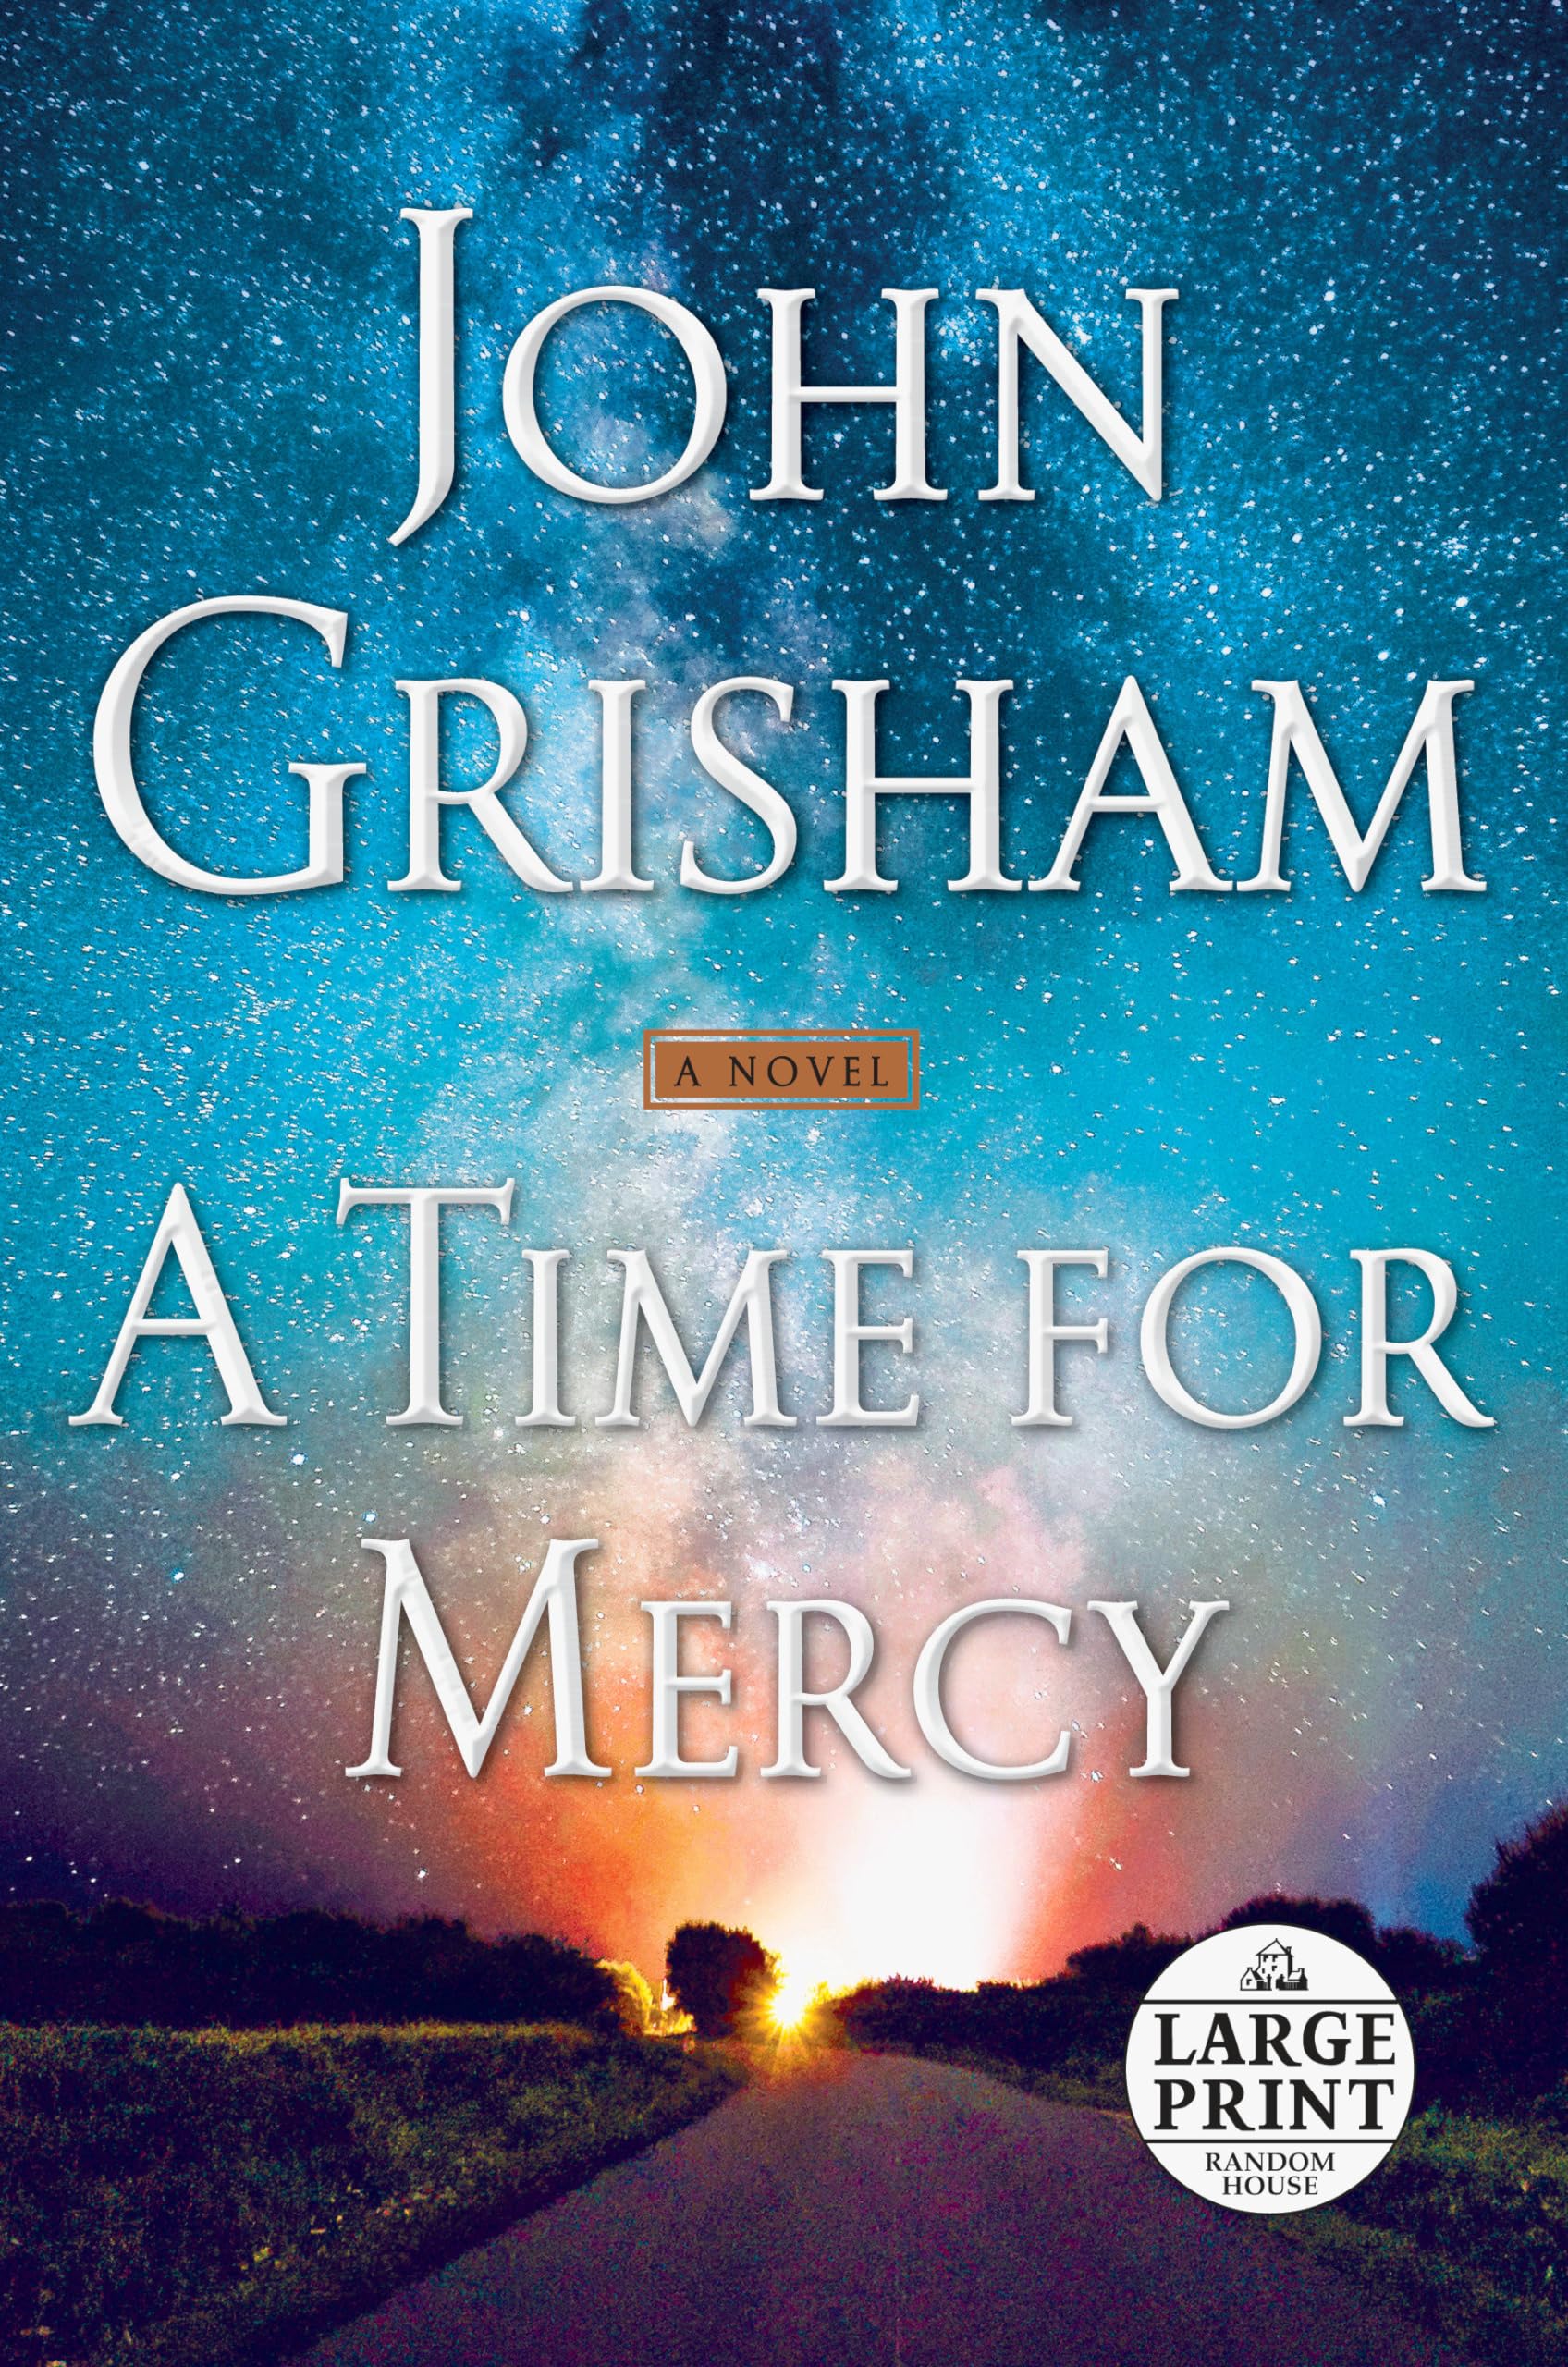 A Time for Mercy by Grisham, John